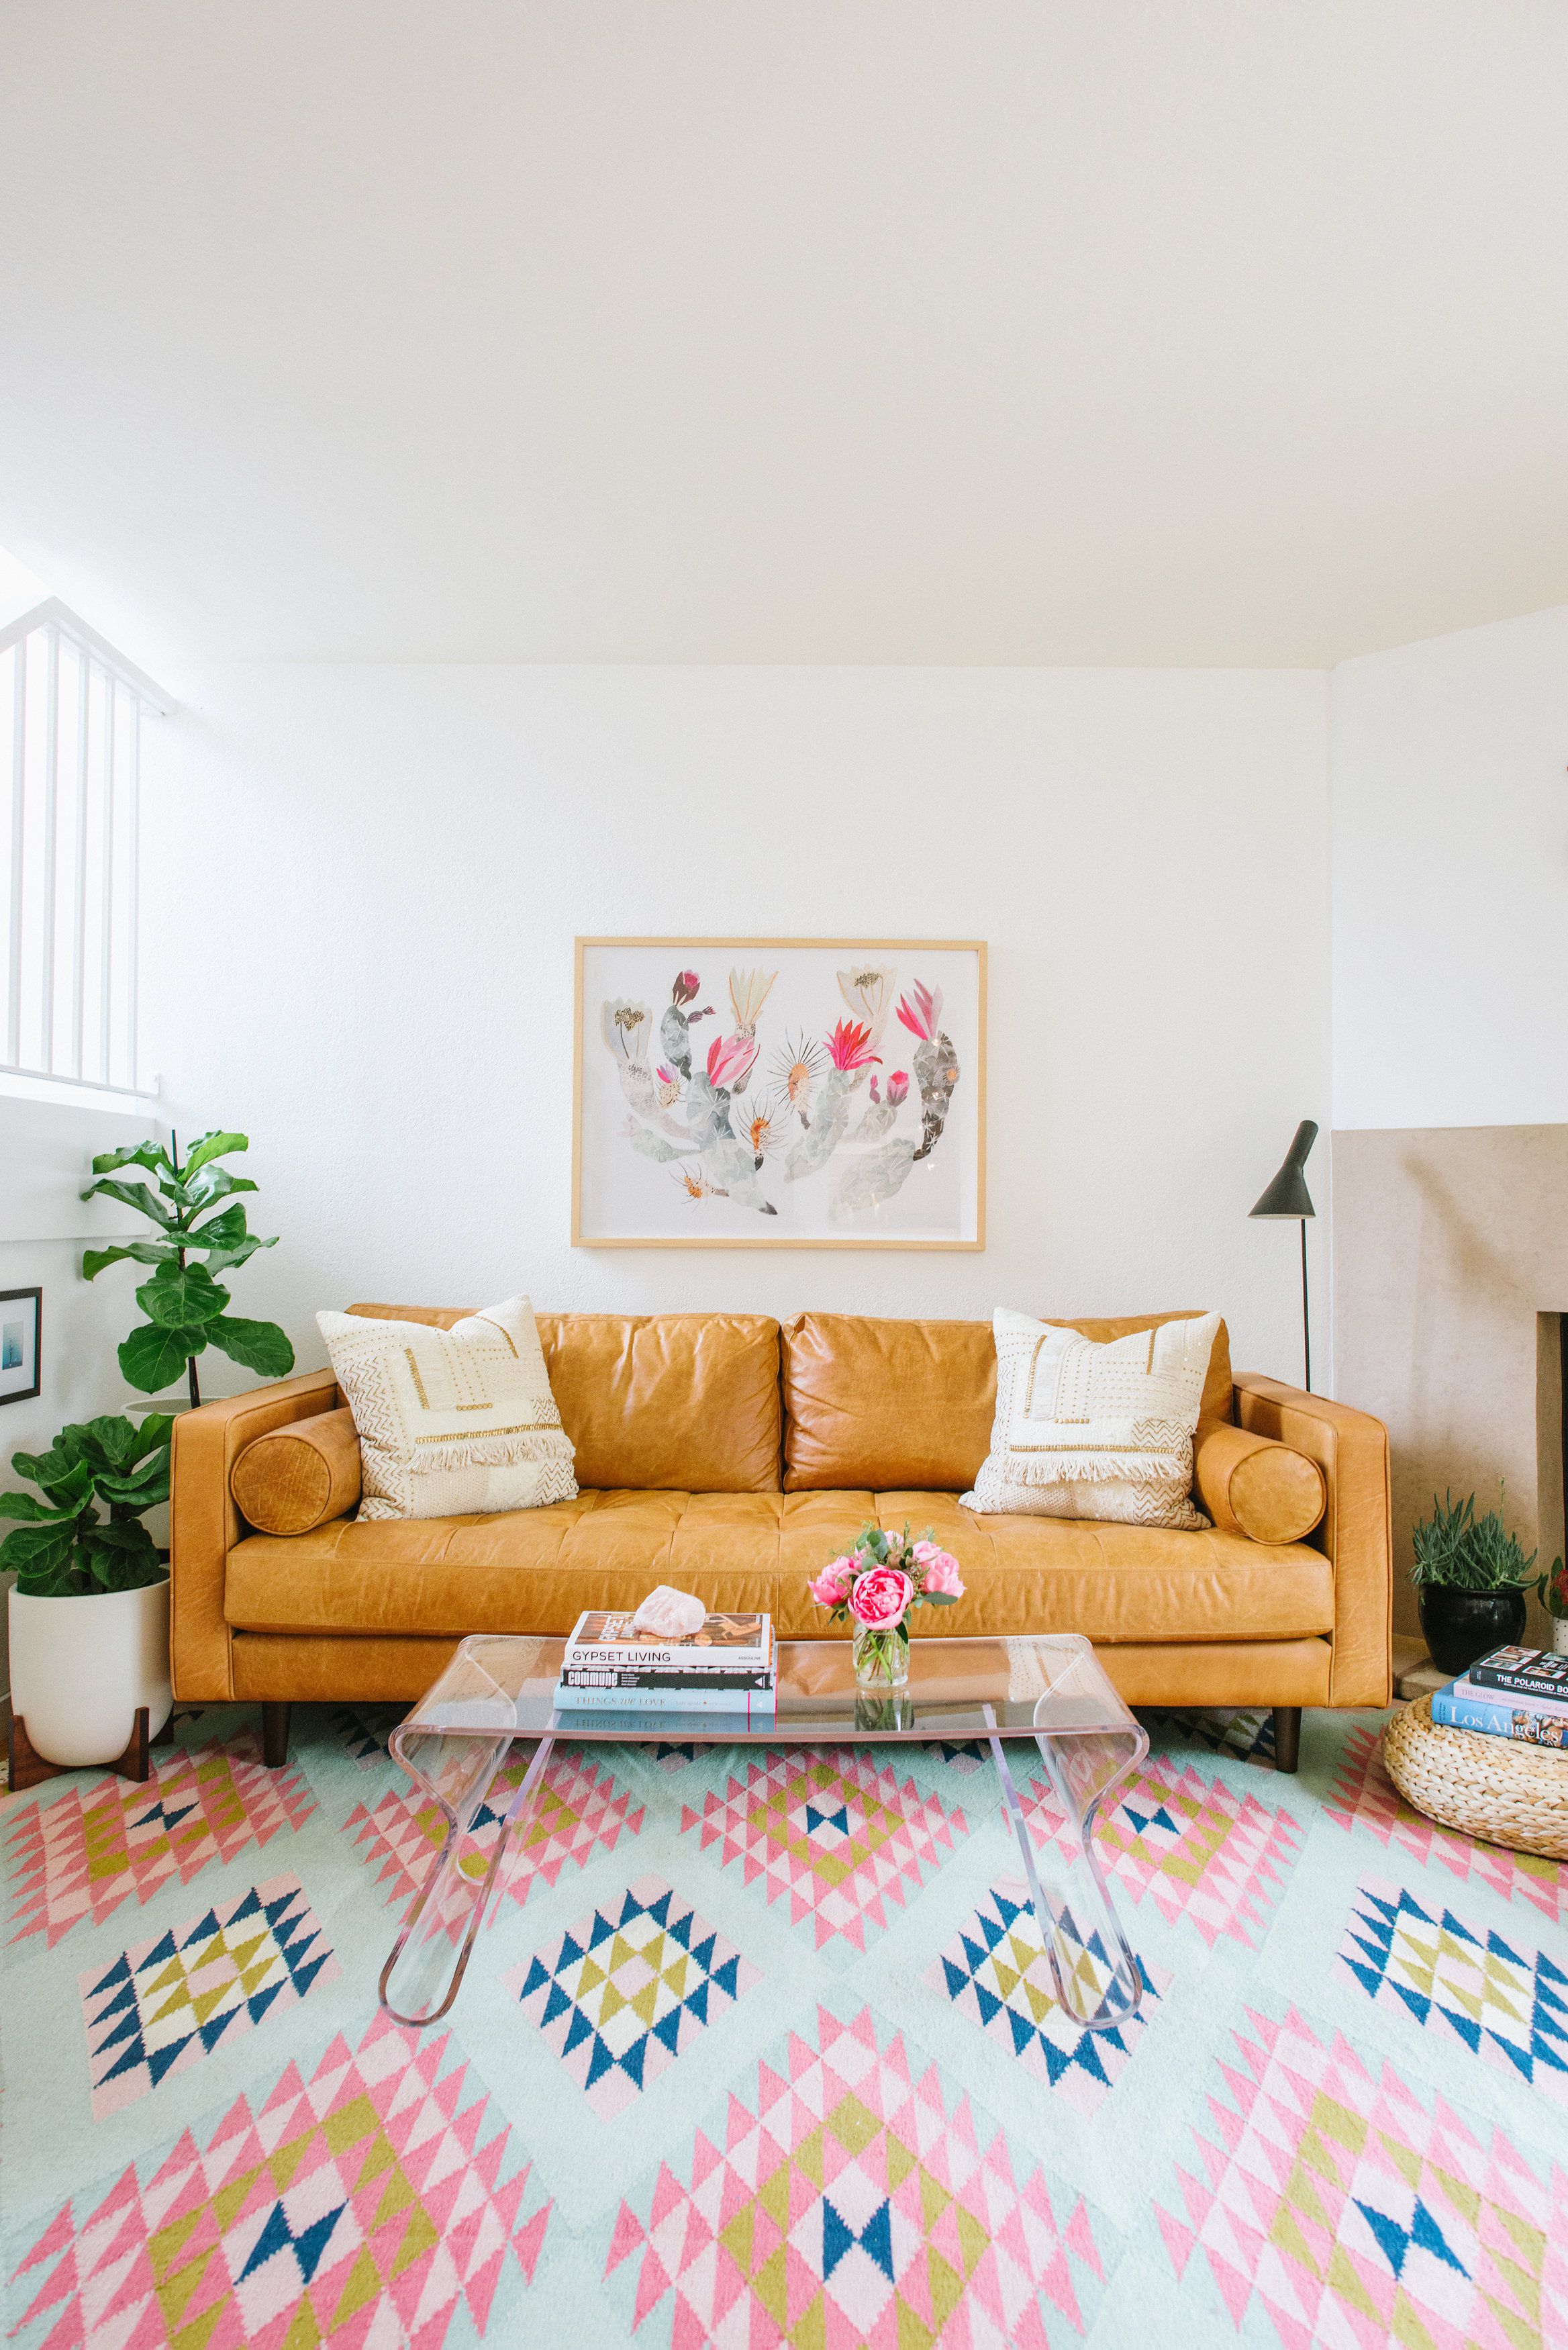 5 Ways Mid-Century Modern Furniture Can Liven Up Your Modern Decor